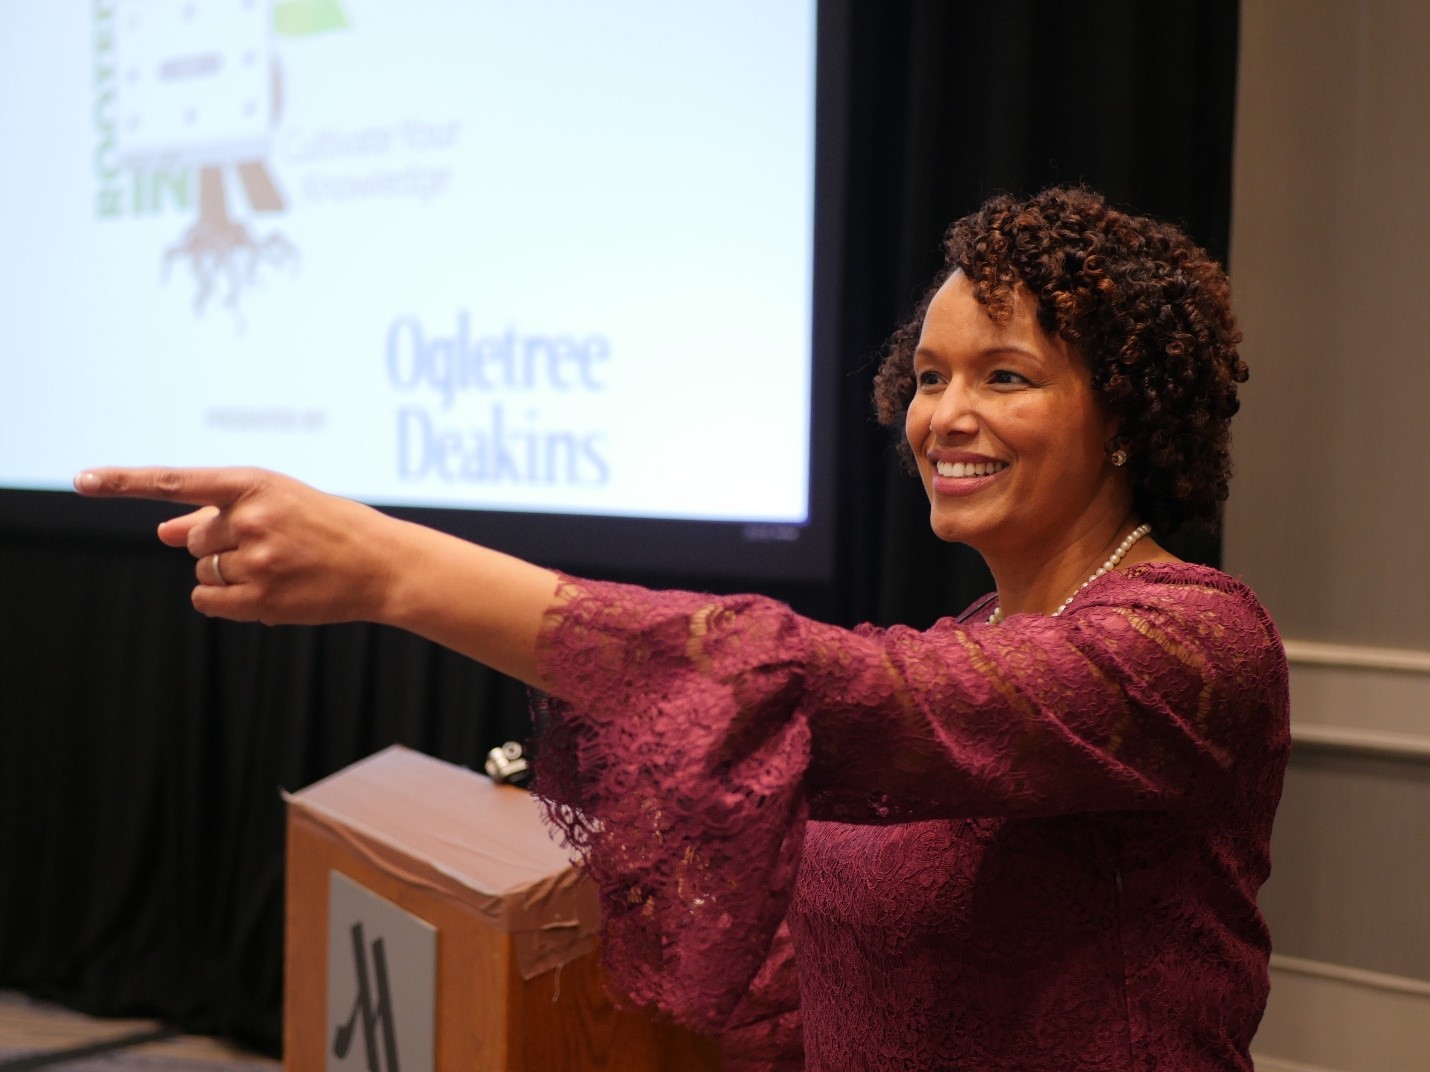 Heather Younger, speaking in a conference setting, gesturing to the attendees.